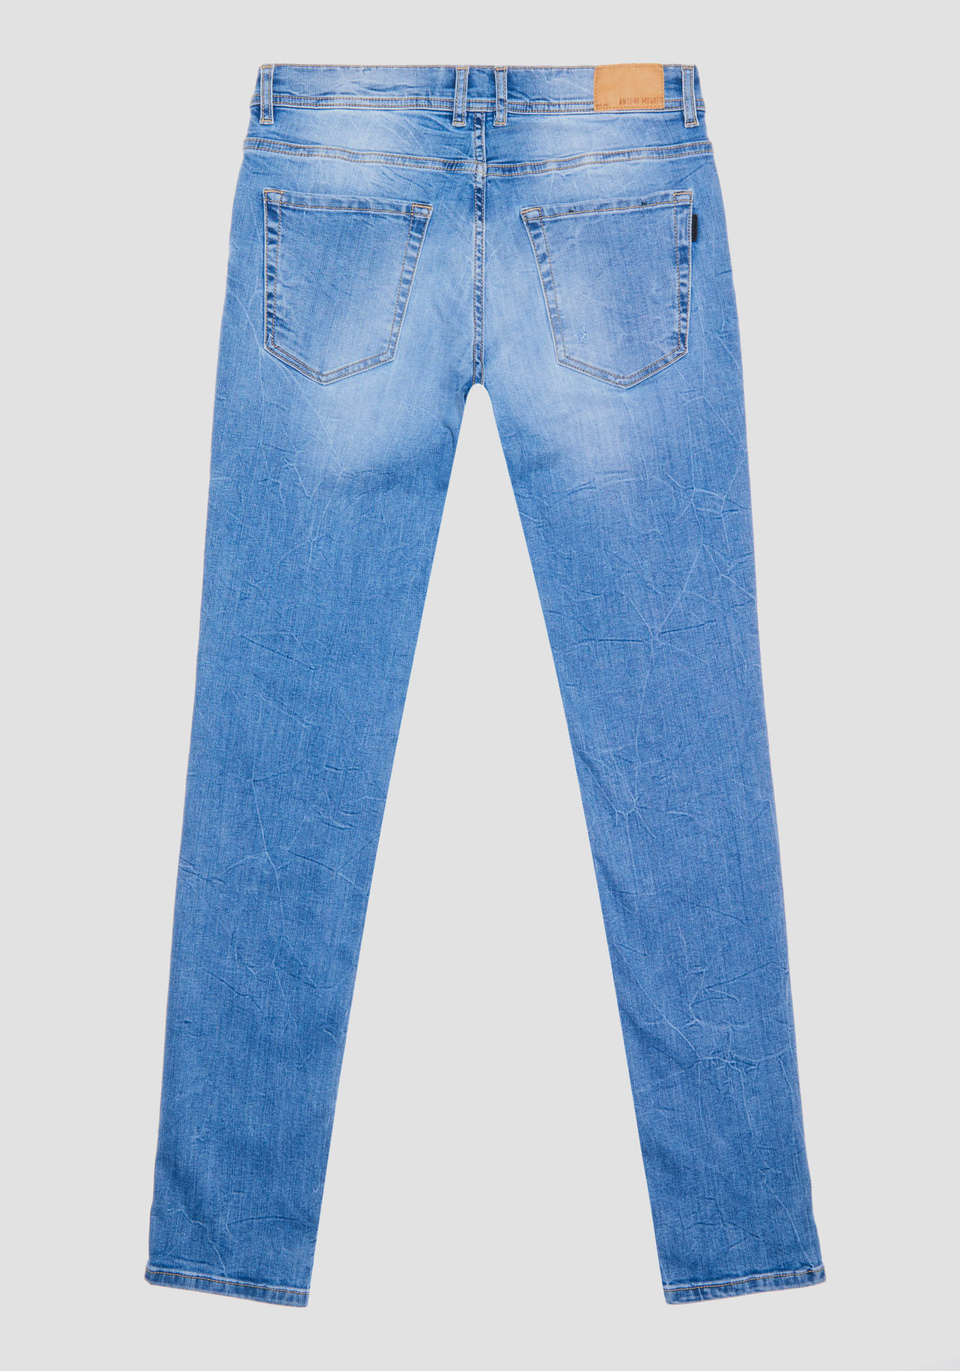 "GILMOUR" SUPER SKINNY FIT JEANS IN STRETCH DENIM BLEND WITH LIGHT BLEACHED EFFECT WASH - Antony Morato Online Shop